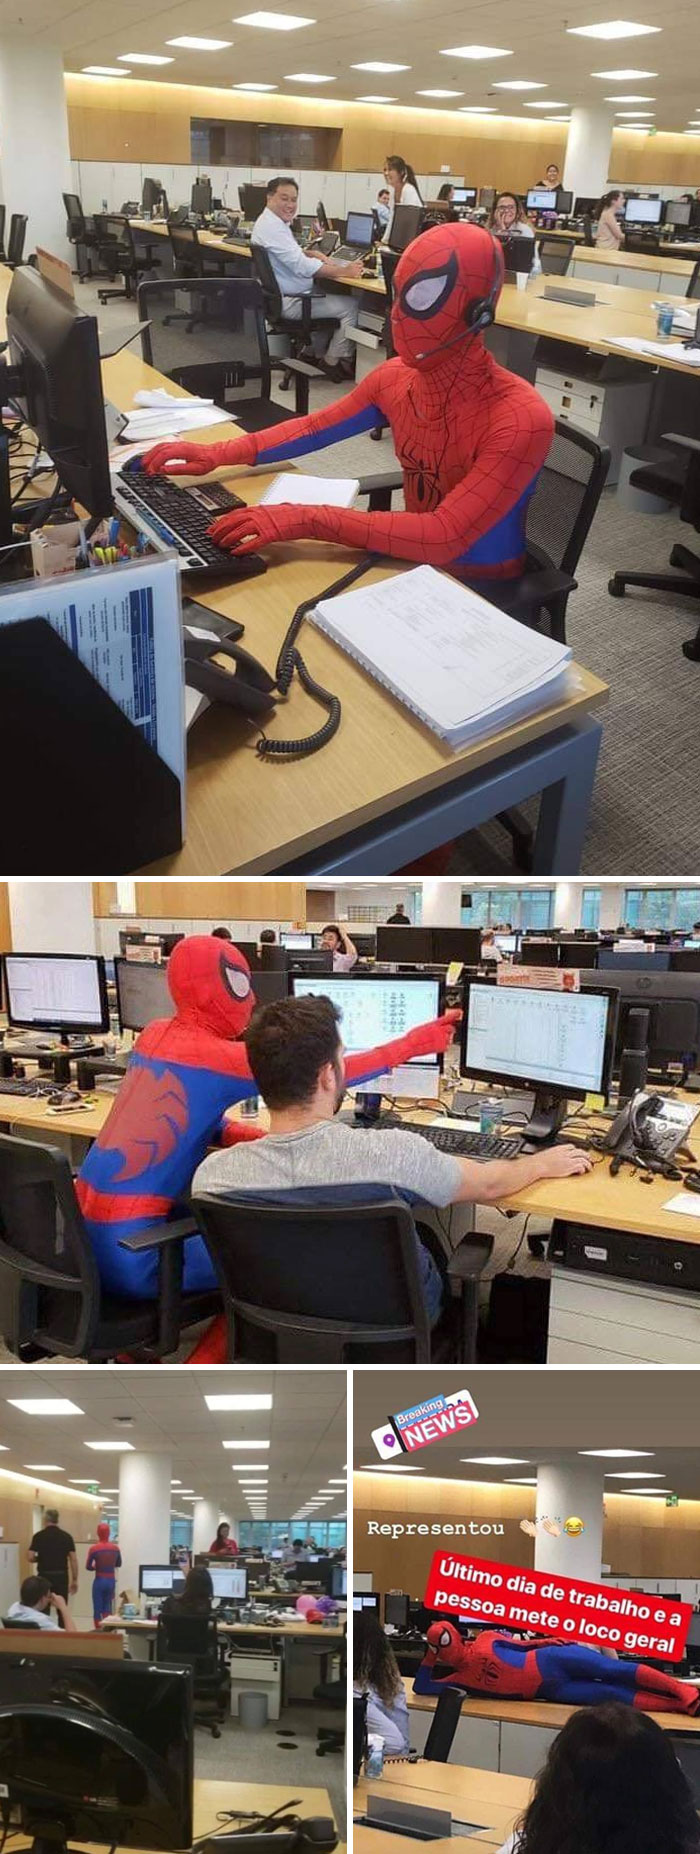 Guy Worked In A Bank, Resigns And Goes To Work The Last Day Dressed As A Spider-Man